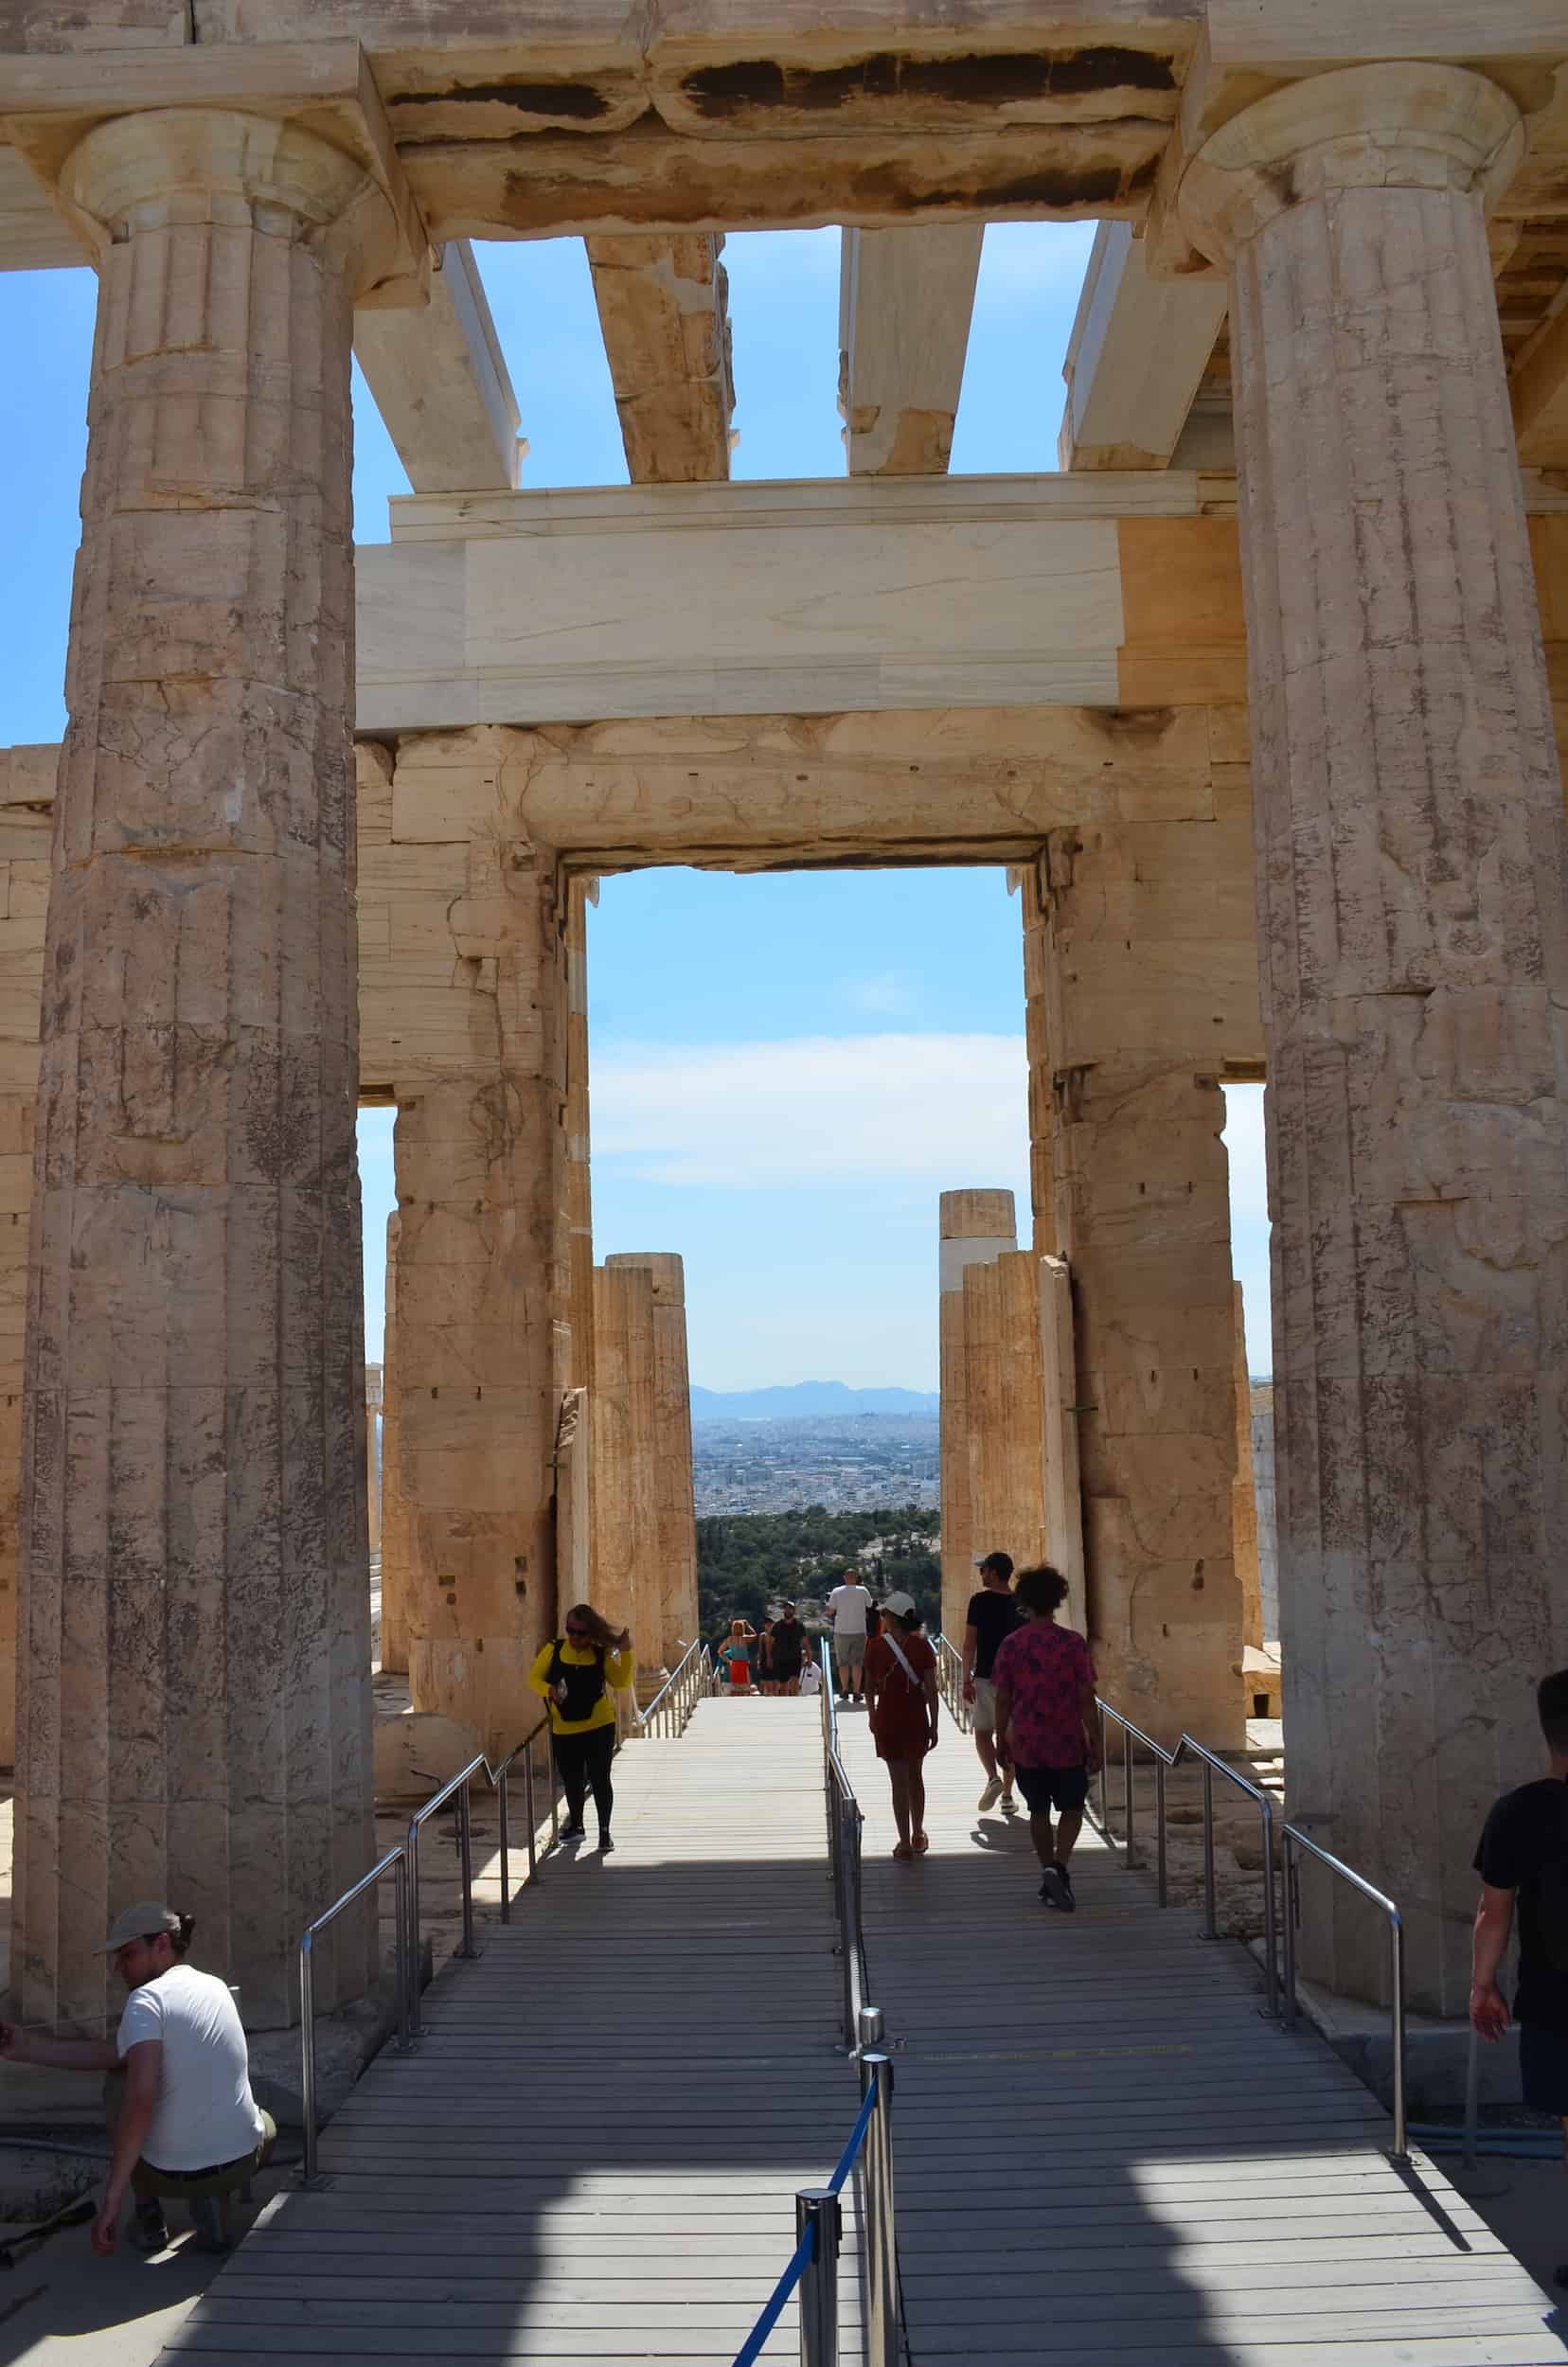 Looking west through the central door of the Propylaia of the Acropolis in Athens, Greece